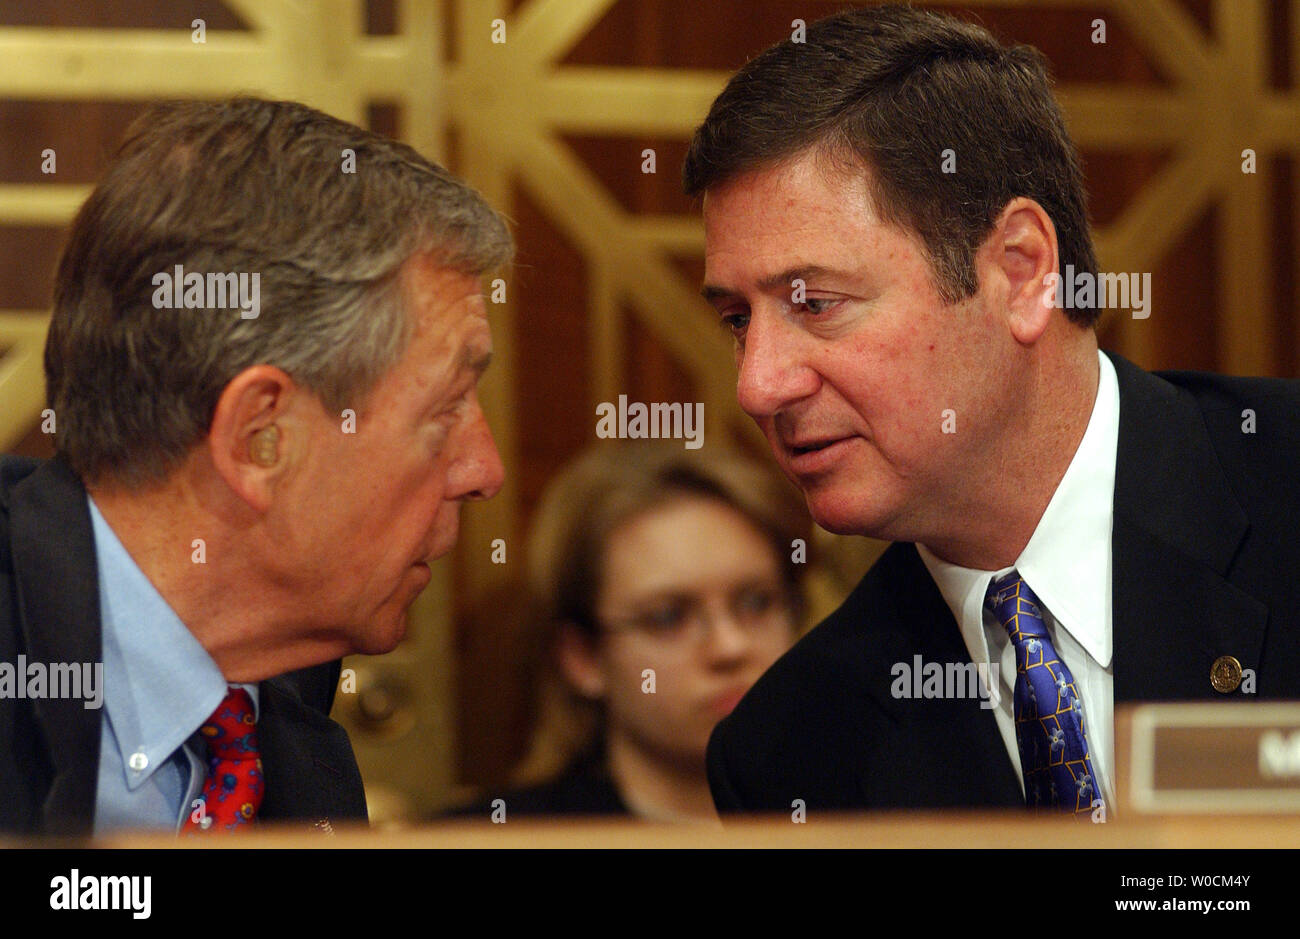 Sens. George Voinovich, R-OH, and George Allen, R-VA, (l to r) confer during a Senate Foreign Relations Committee meeting to vote on the nomination of John Bolton to be the U.S. ambassador to the U.N. on May 12, 2005, on Capitol Hill in Washington. Voinovich continues to oppose the nomination despite pressure from his party to support the President's choice.     (UPI Photo/Roger L. Wollenberg) Stock Photo